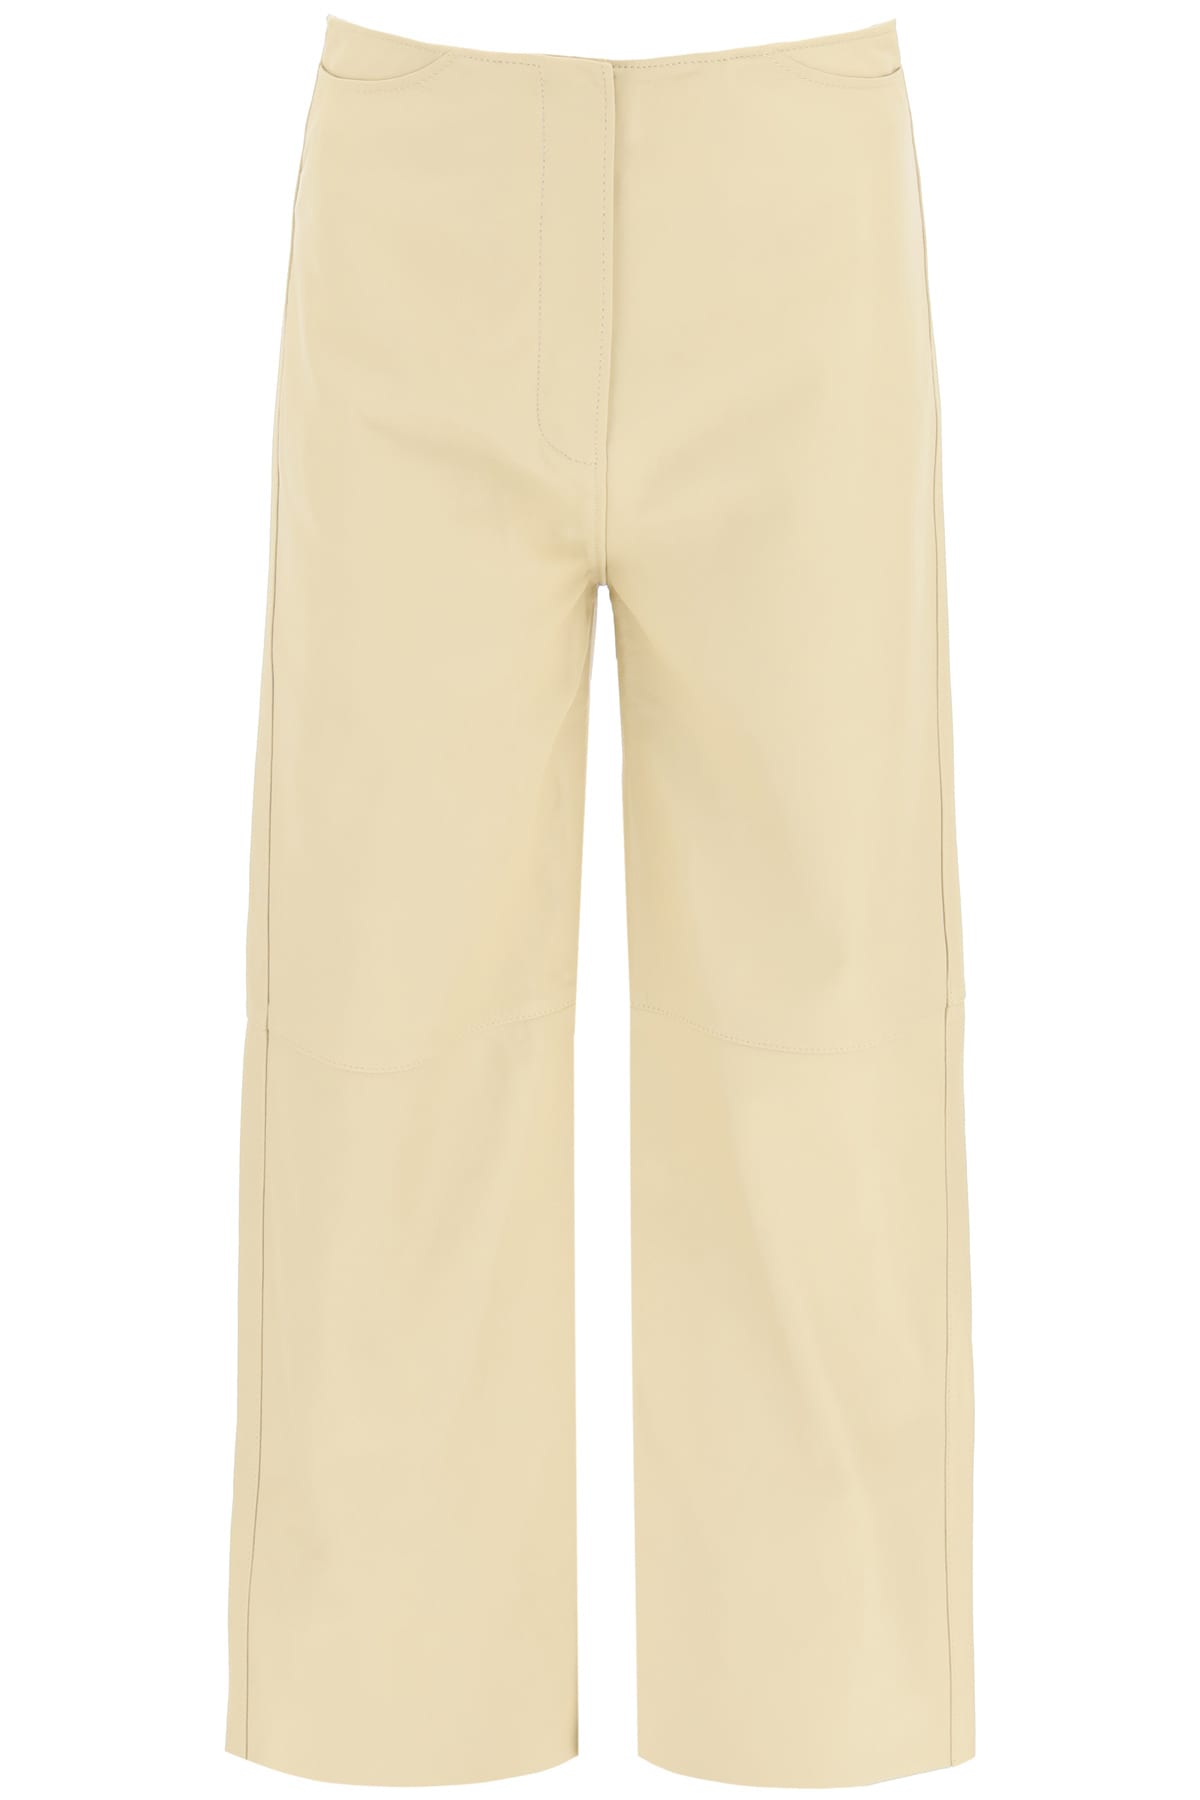 Totême Leather Wide Trousers